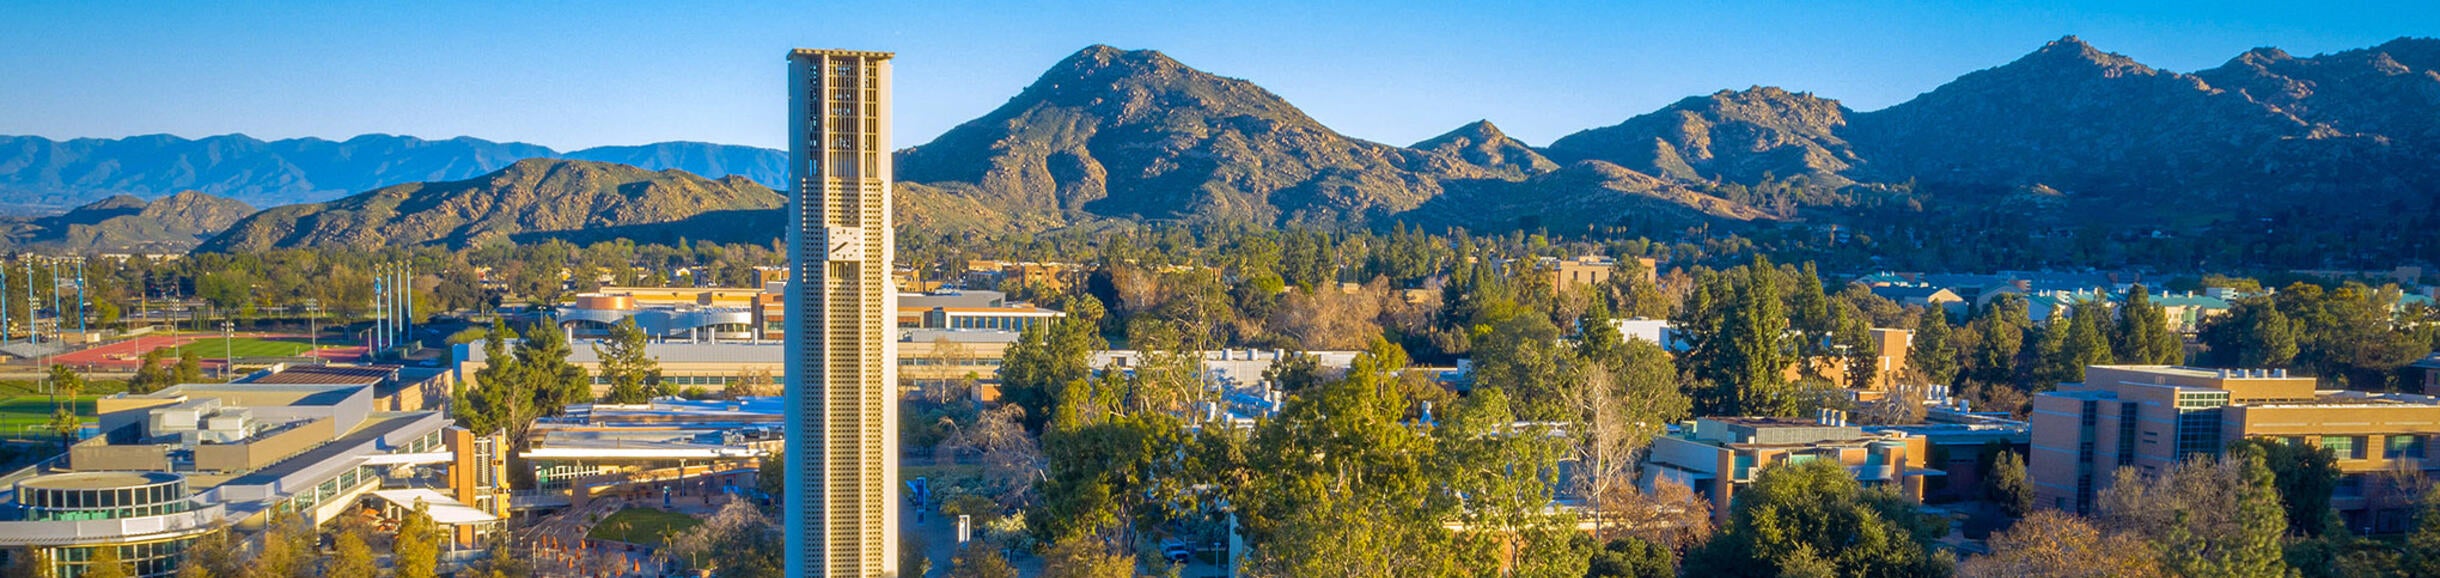 Aerial view of UCR Campus, Bell Tower and mountains (c) UCR/Stan Lim